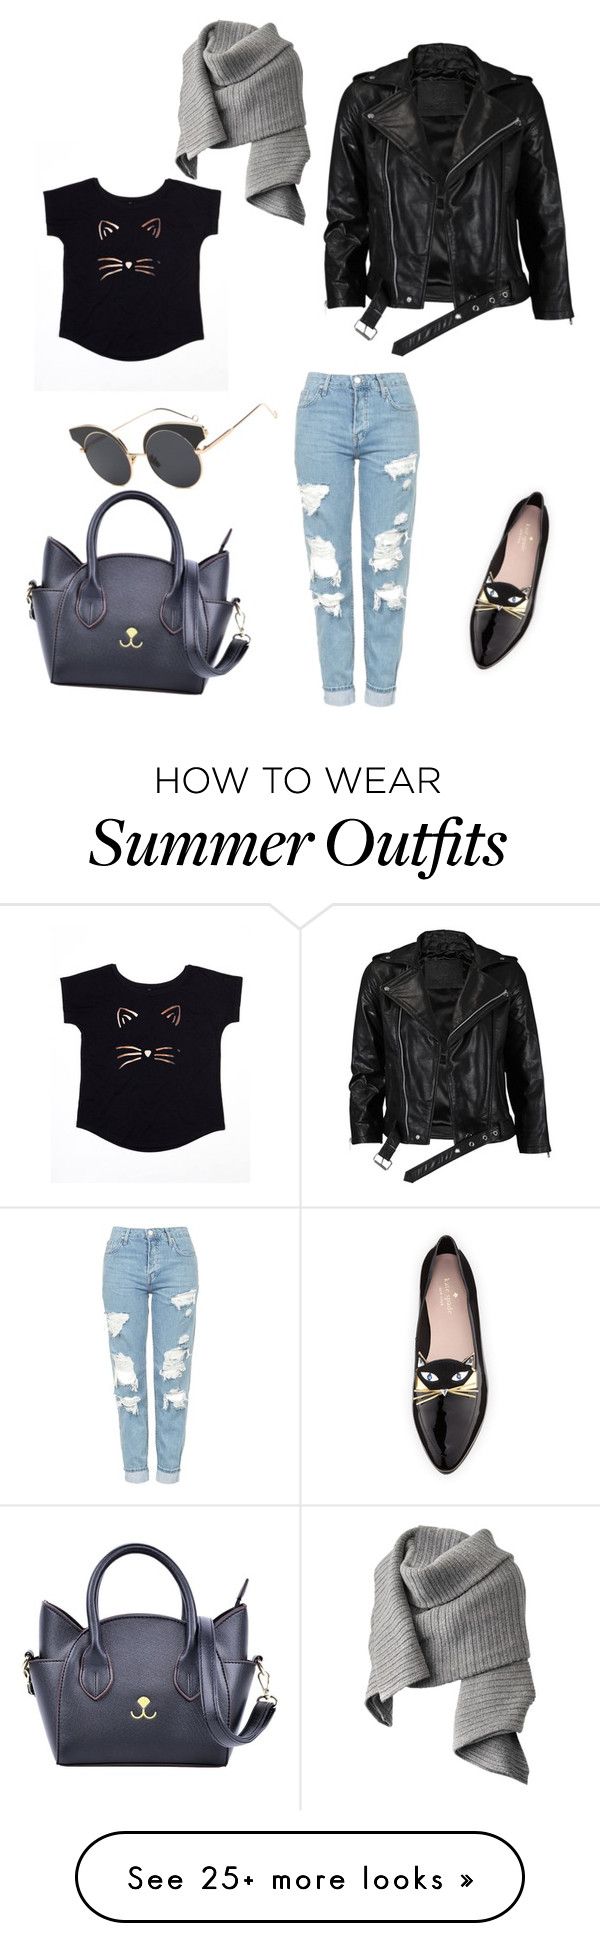 "My First Polyvore Outfit" by fabiana-paula-hoffmann on Polyvore featu...